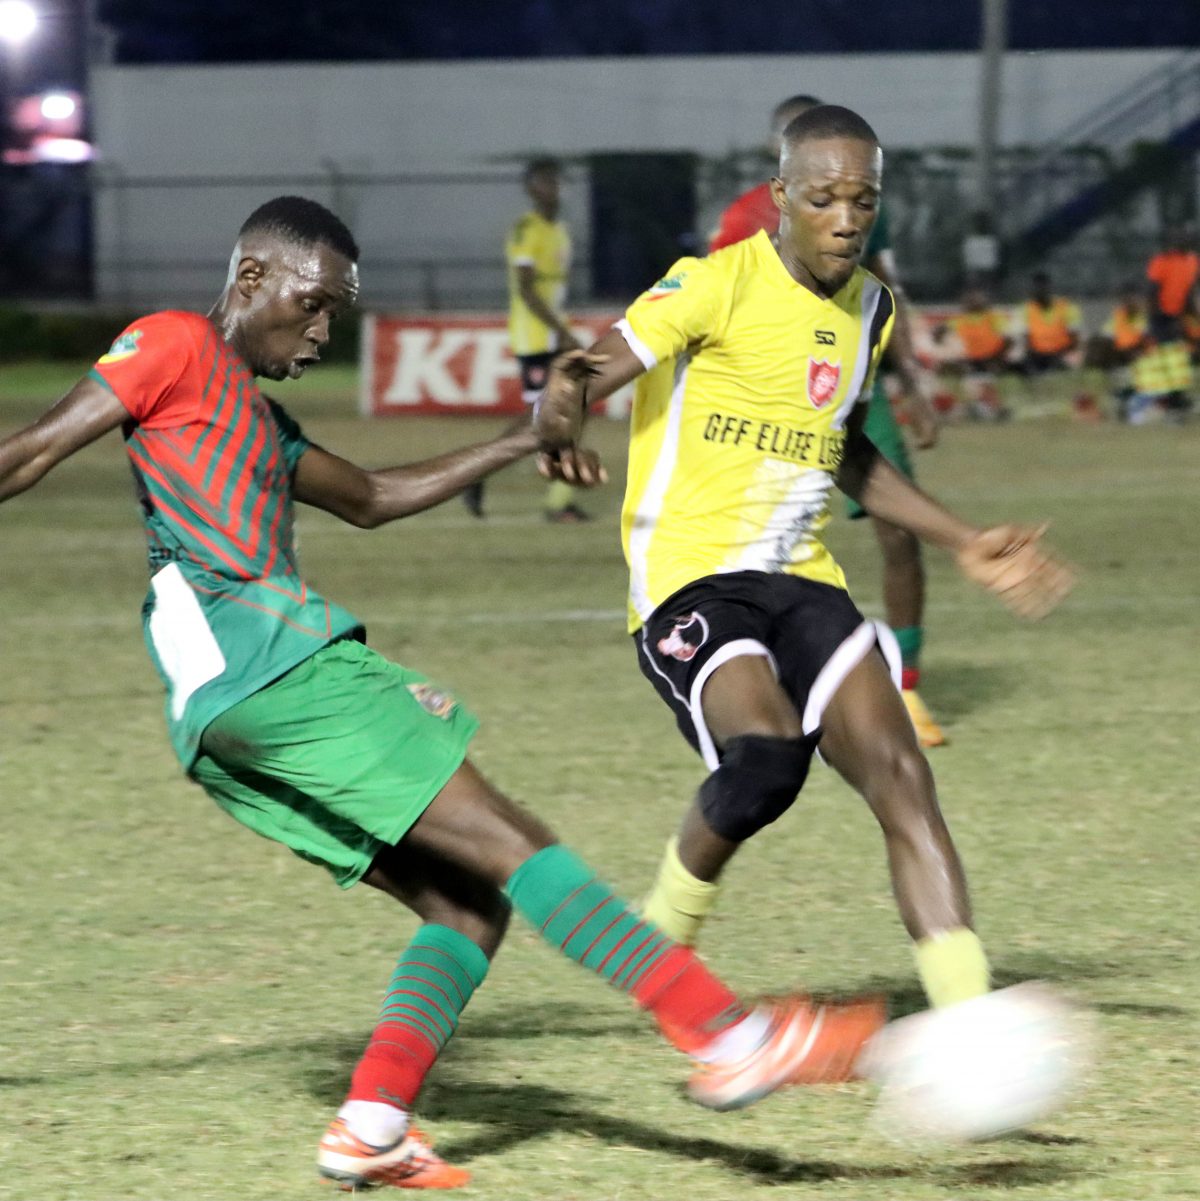 Darrell George of GDF (left) is attempting a clearance while being challenged by an Anns Grove player.